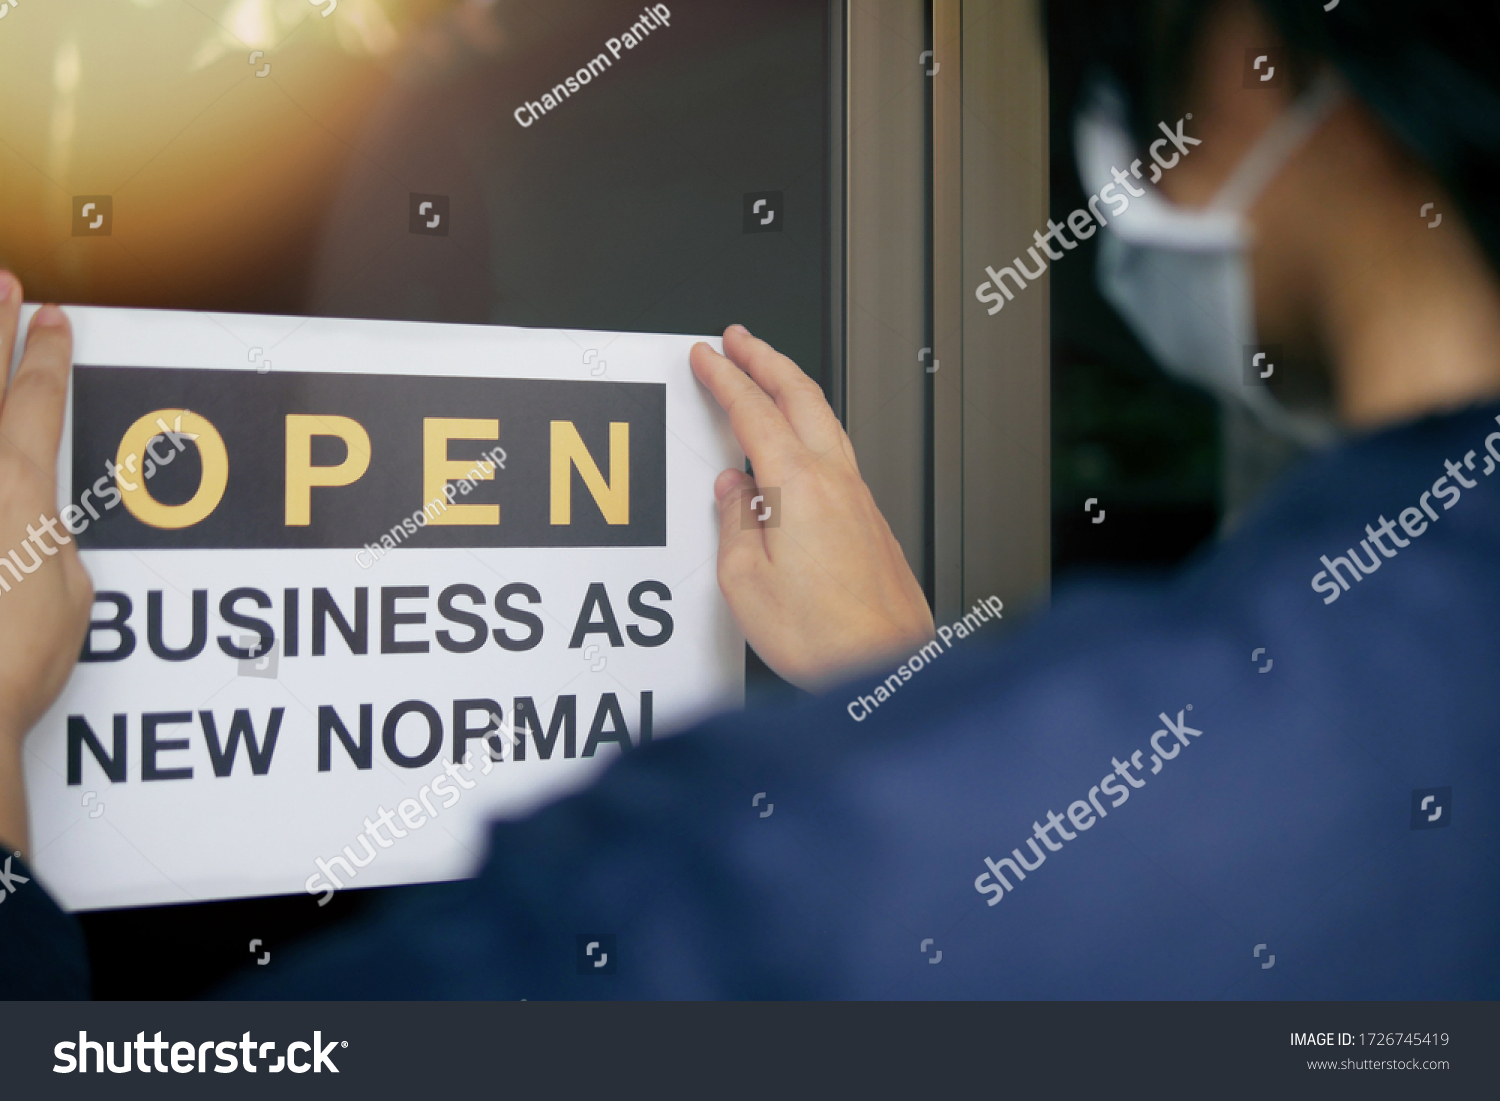 Reopening for business adapt to new normal in the novel Coronavirus COVID-19 pandemic. Rear view of business owner wearing medical mask placing open sign “OPEN BUSINESS AS NEW NORMAL” on front door. #1726745419